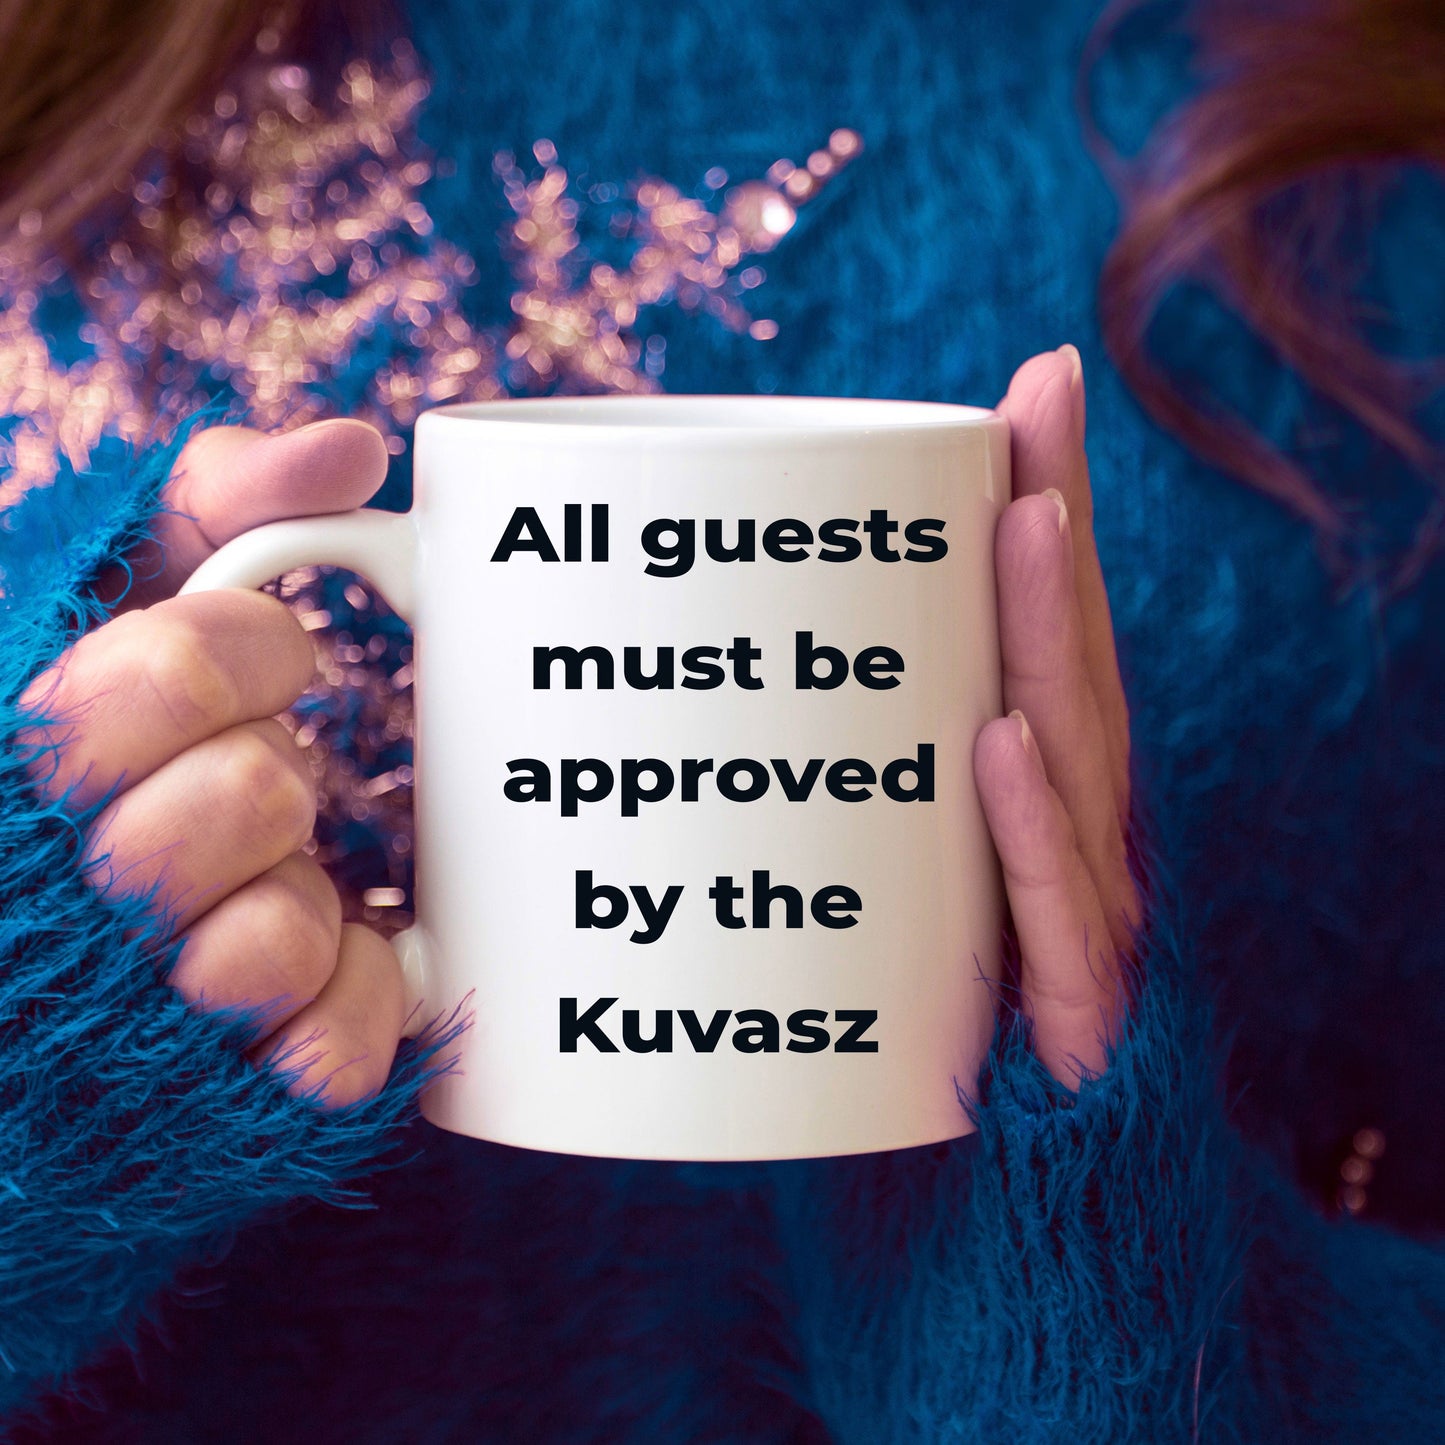 Kuvasz Dog funny Coffee Mug - All guests must be approved by the Kuvasz